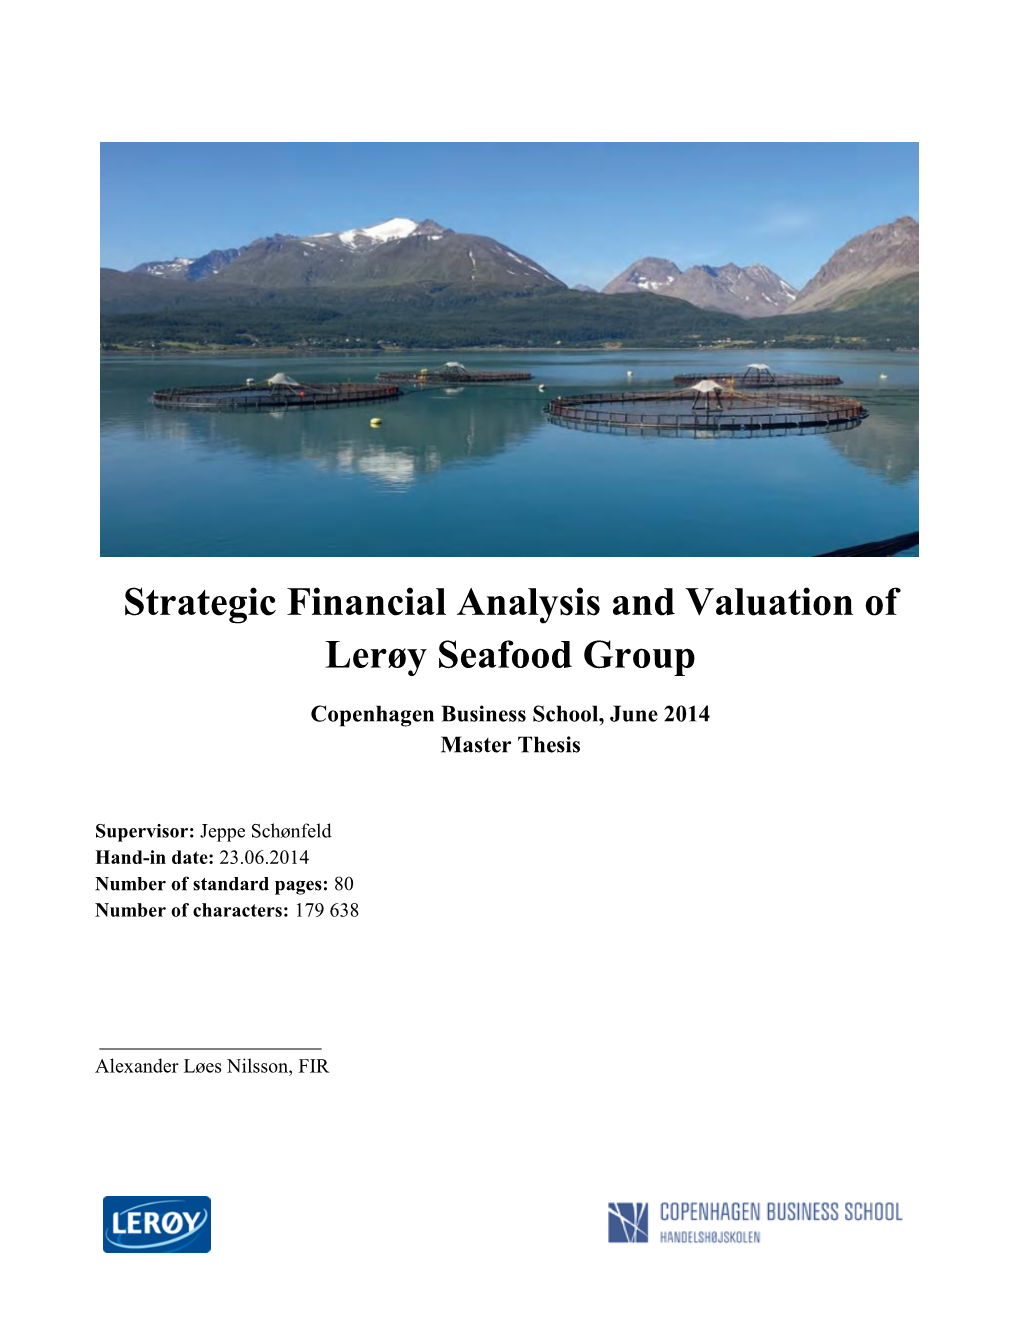 Strategic Financial Analysis and Valuation of Lerøy Seafood Group